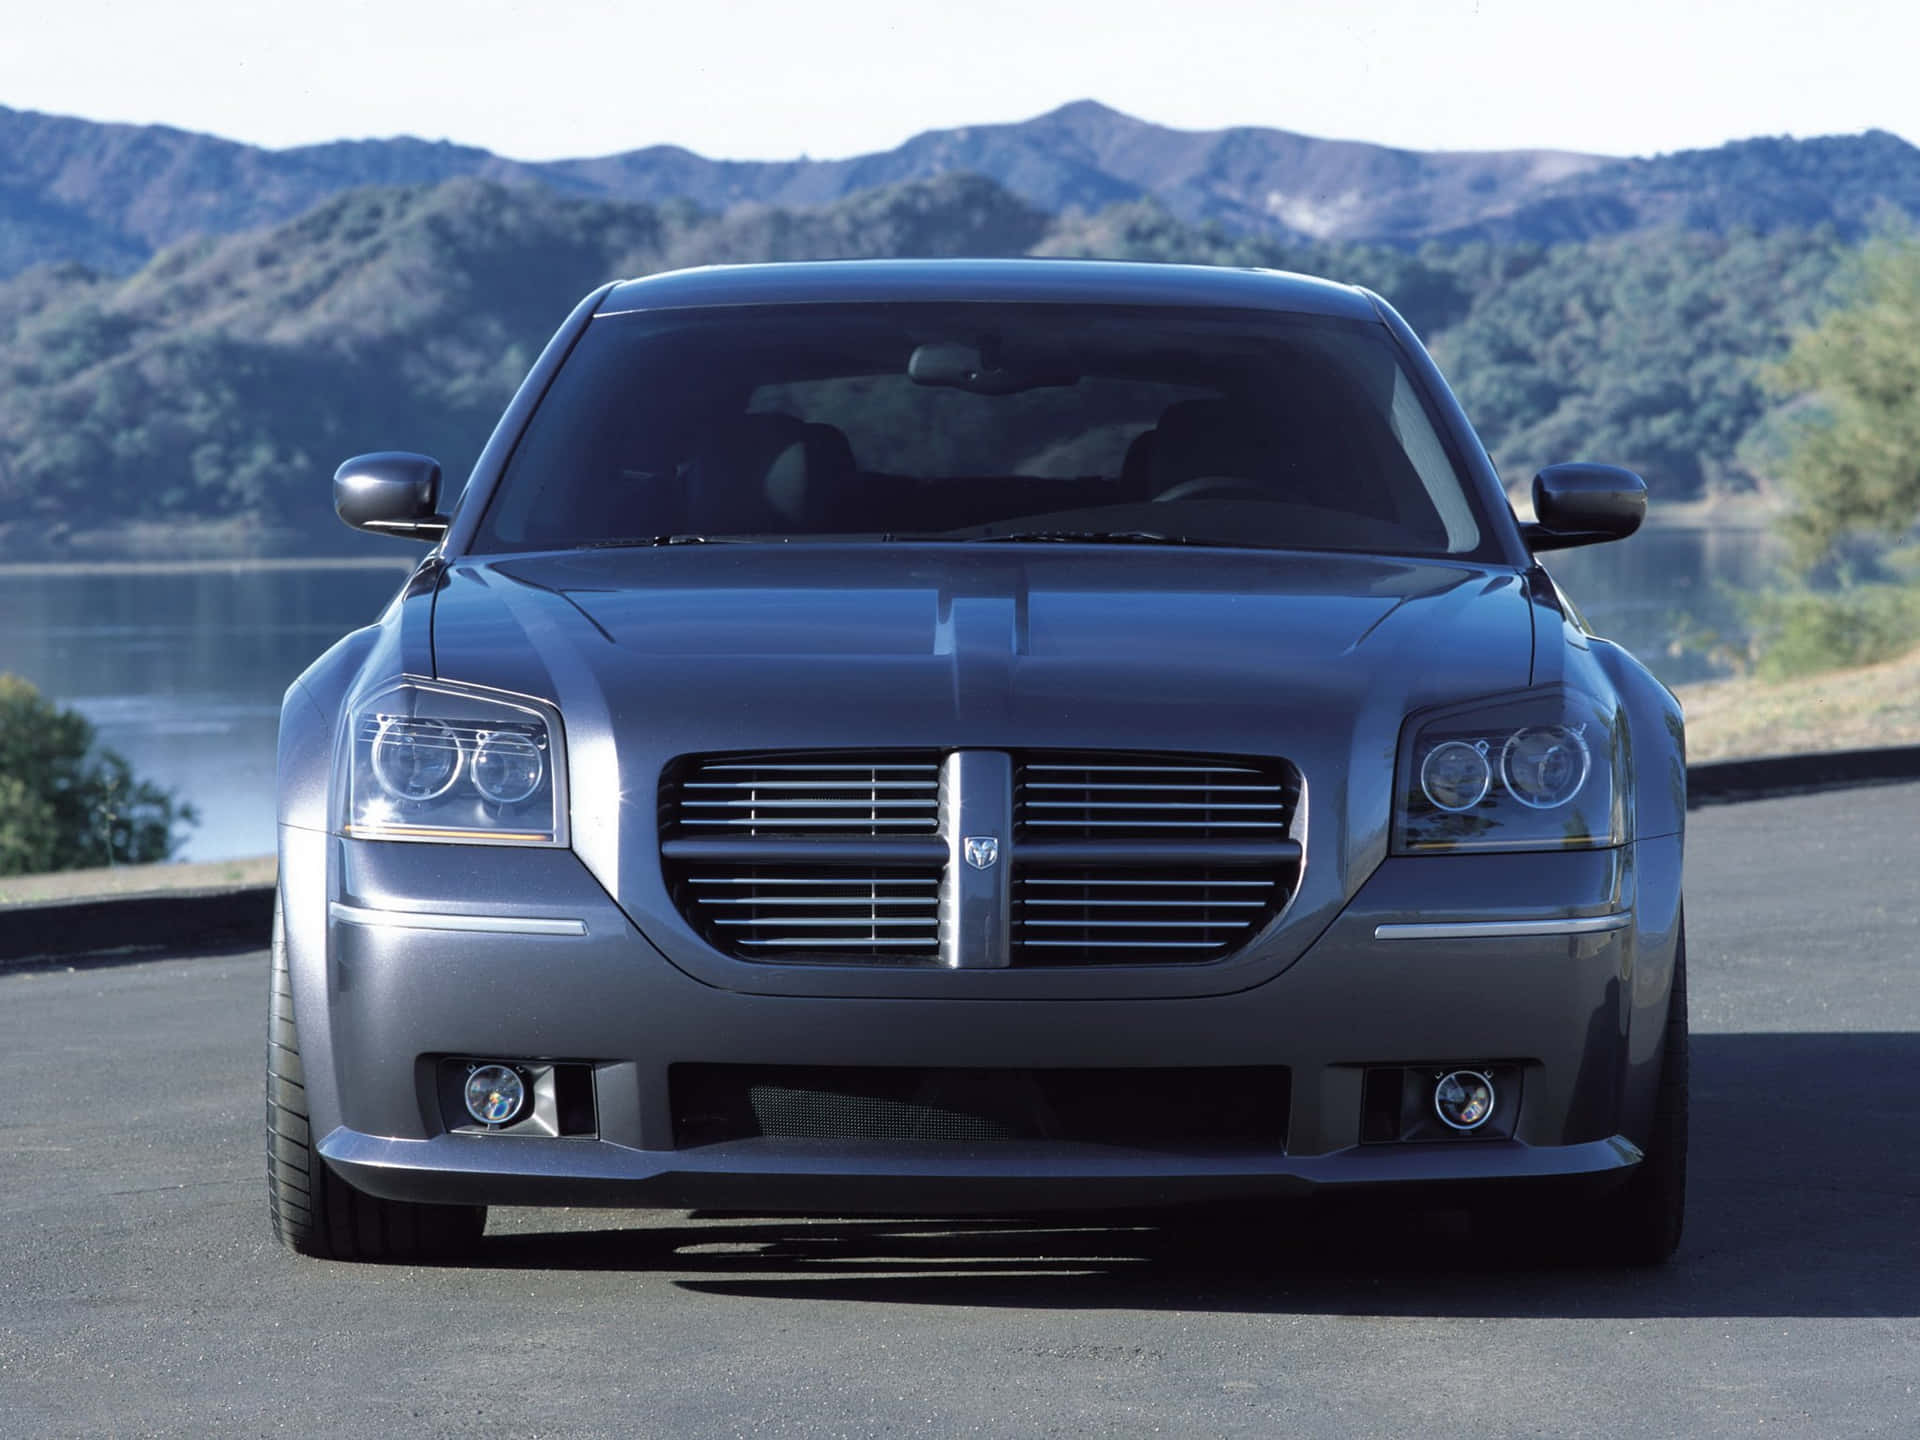 Powerful Dodge Magnum Cruising On A Sun-kissed Highway. Wallpaper